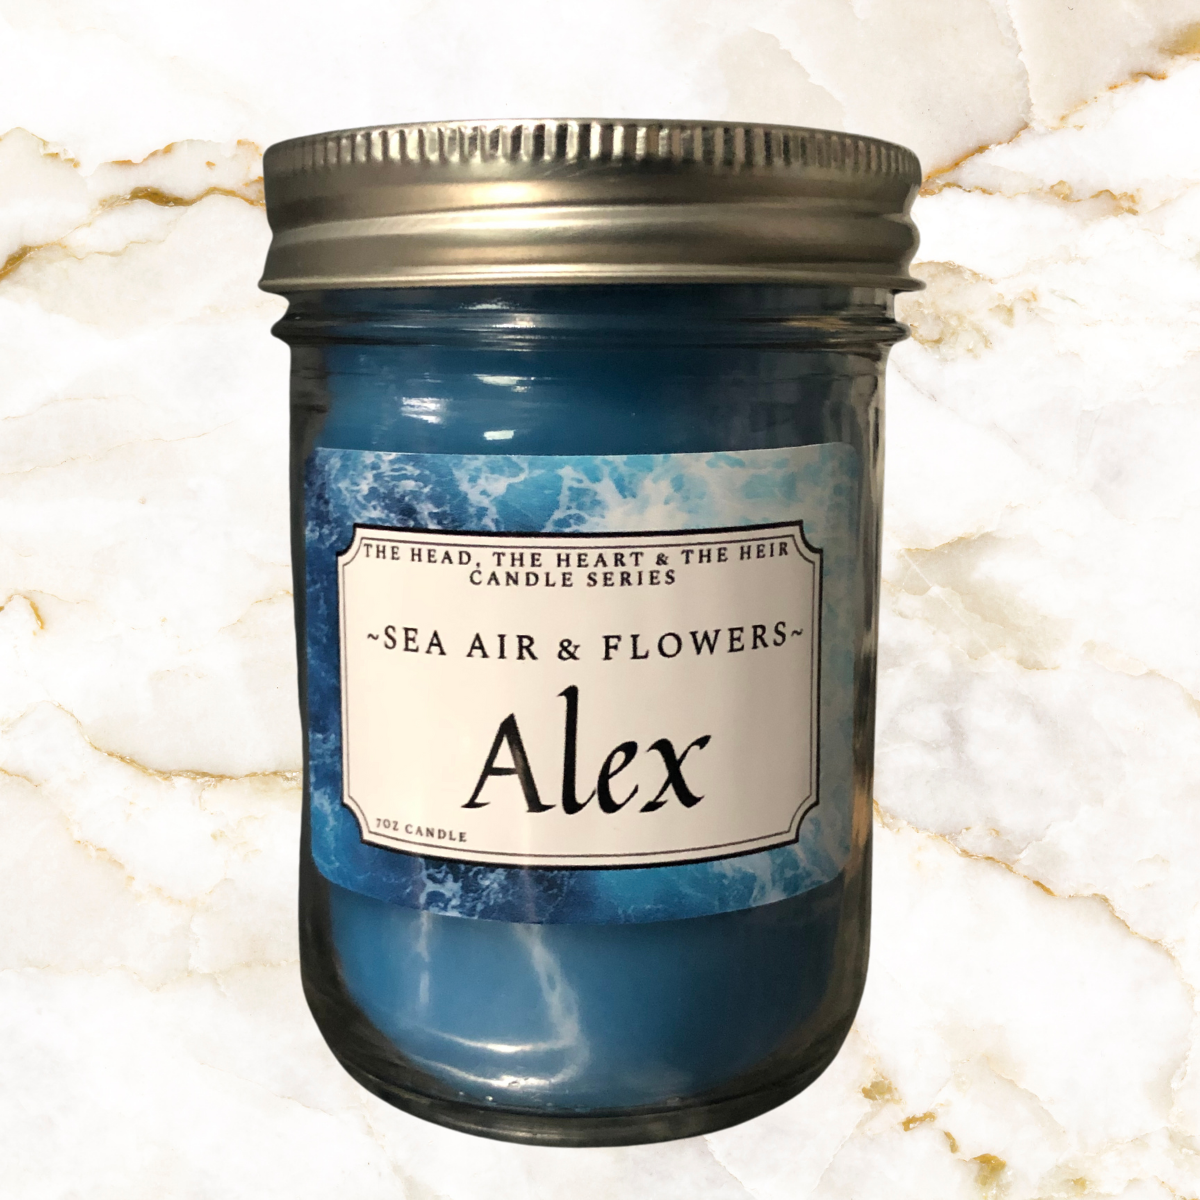 Blue candle in 250 ml mason jar - Label says Alex with Sea Air & Flowers smell